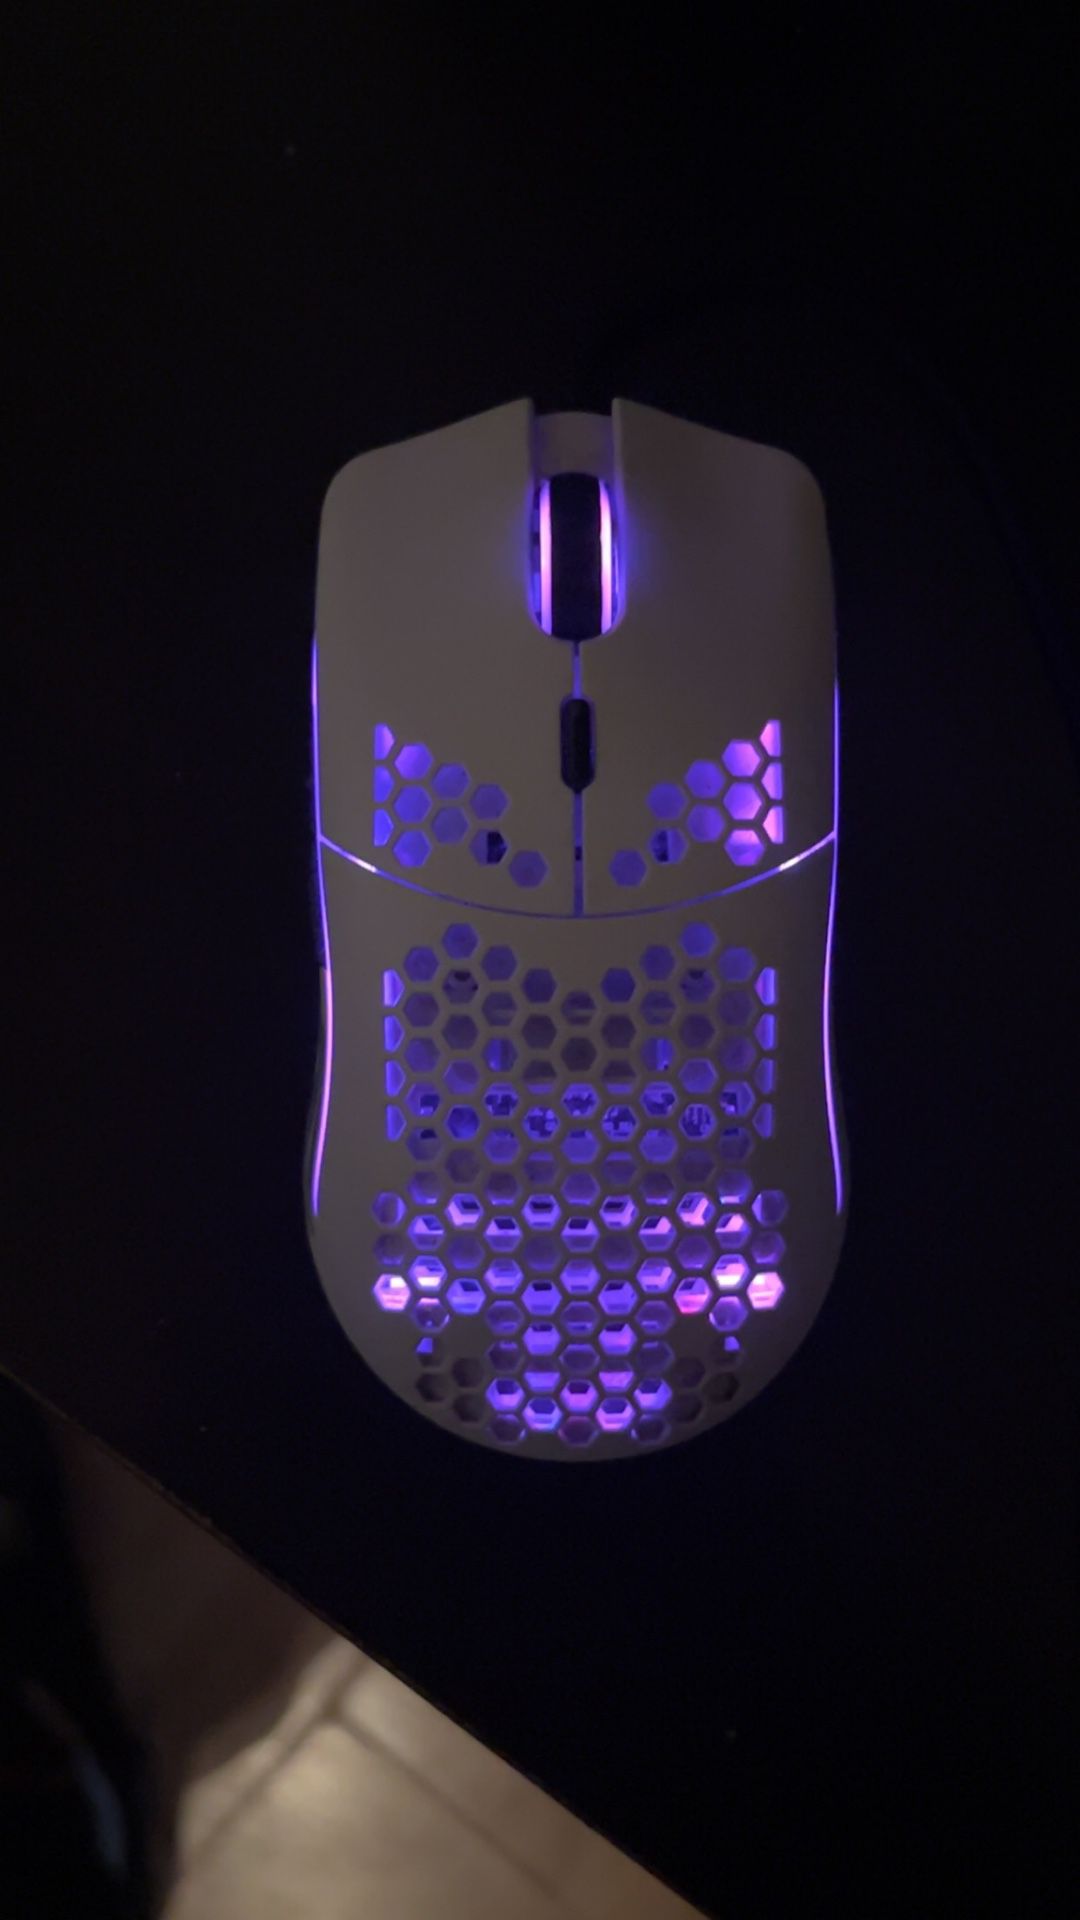 Glorious Model O Wired White Mouse